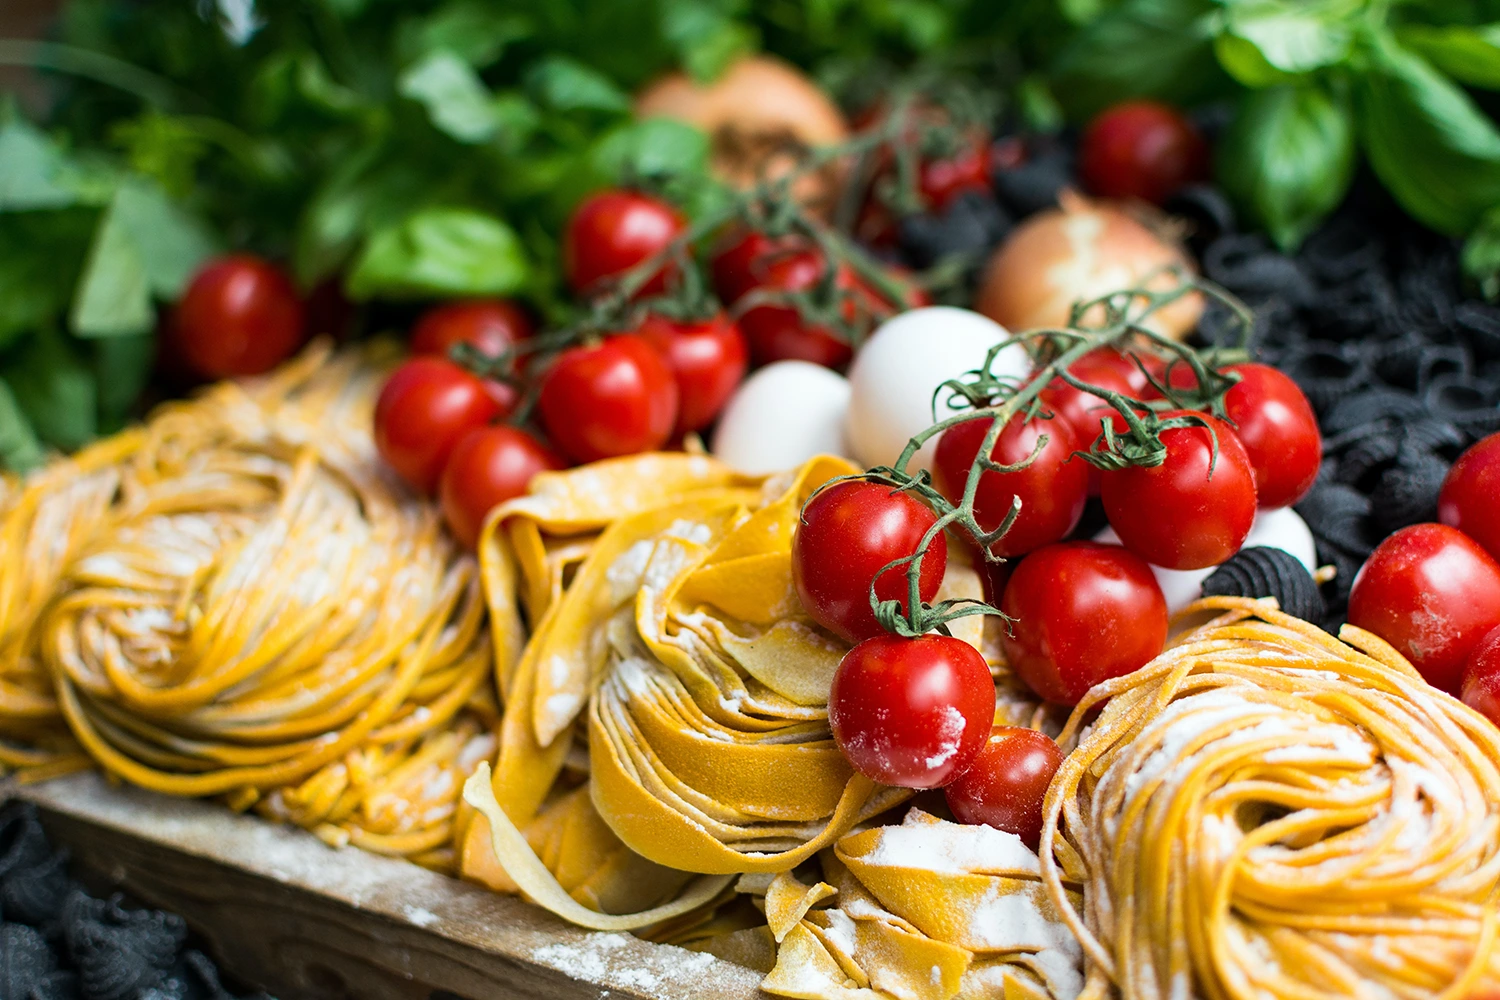 A visually appealing wooden tray filled with pasta, tomatoes, and olives to entice customers through a profitable email newsletter.